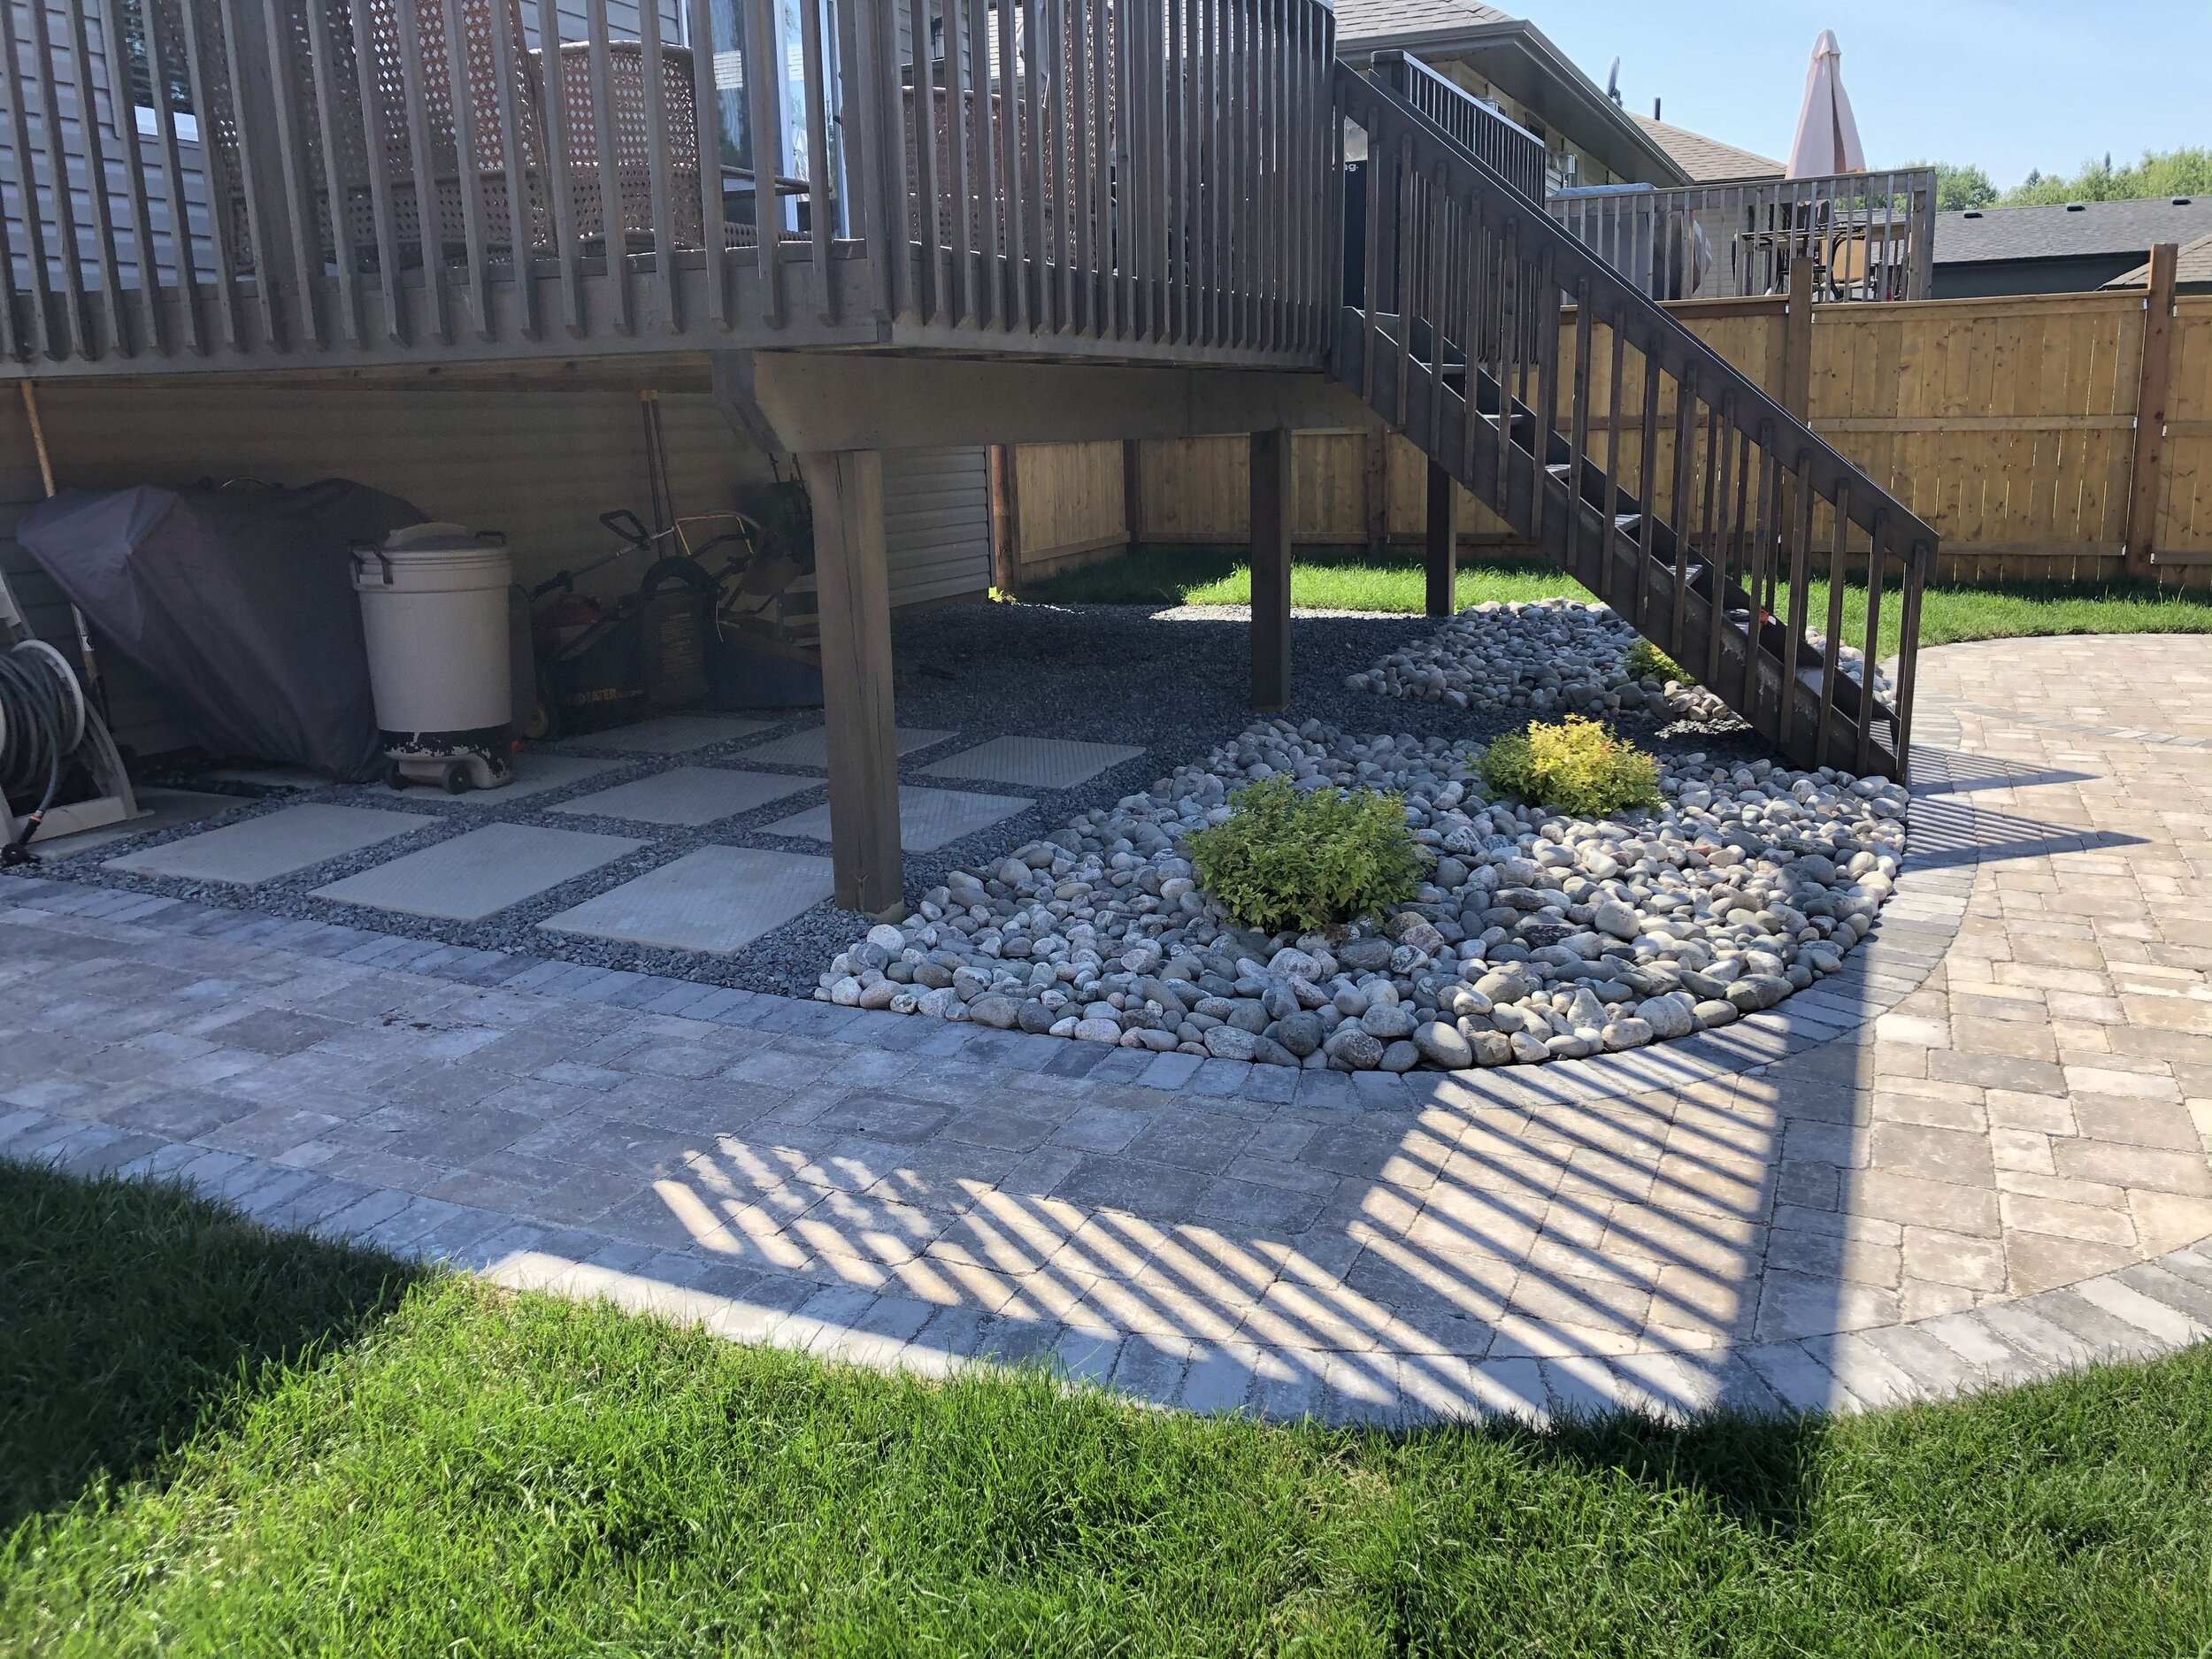 Roman Paver Pathway to a nice clean storage area under the deck and a circle patio 